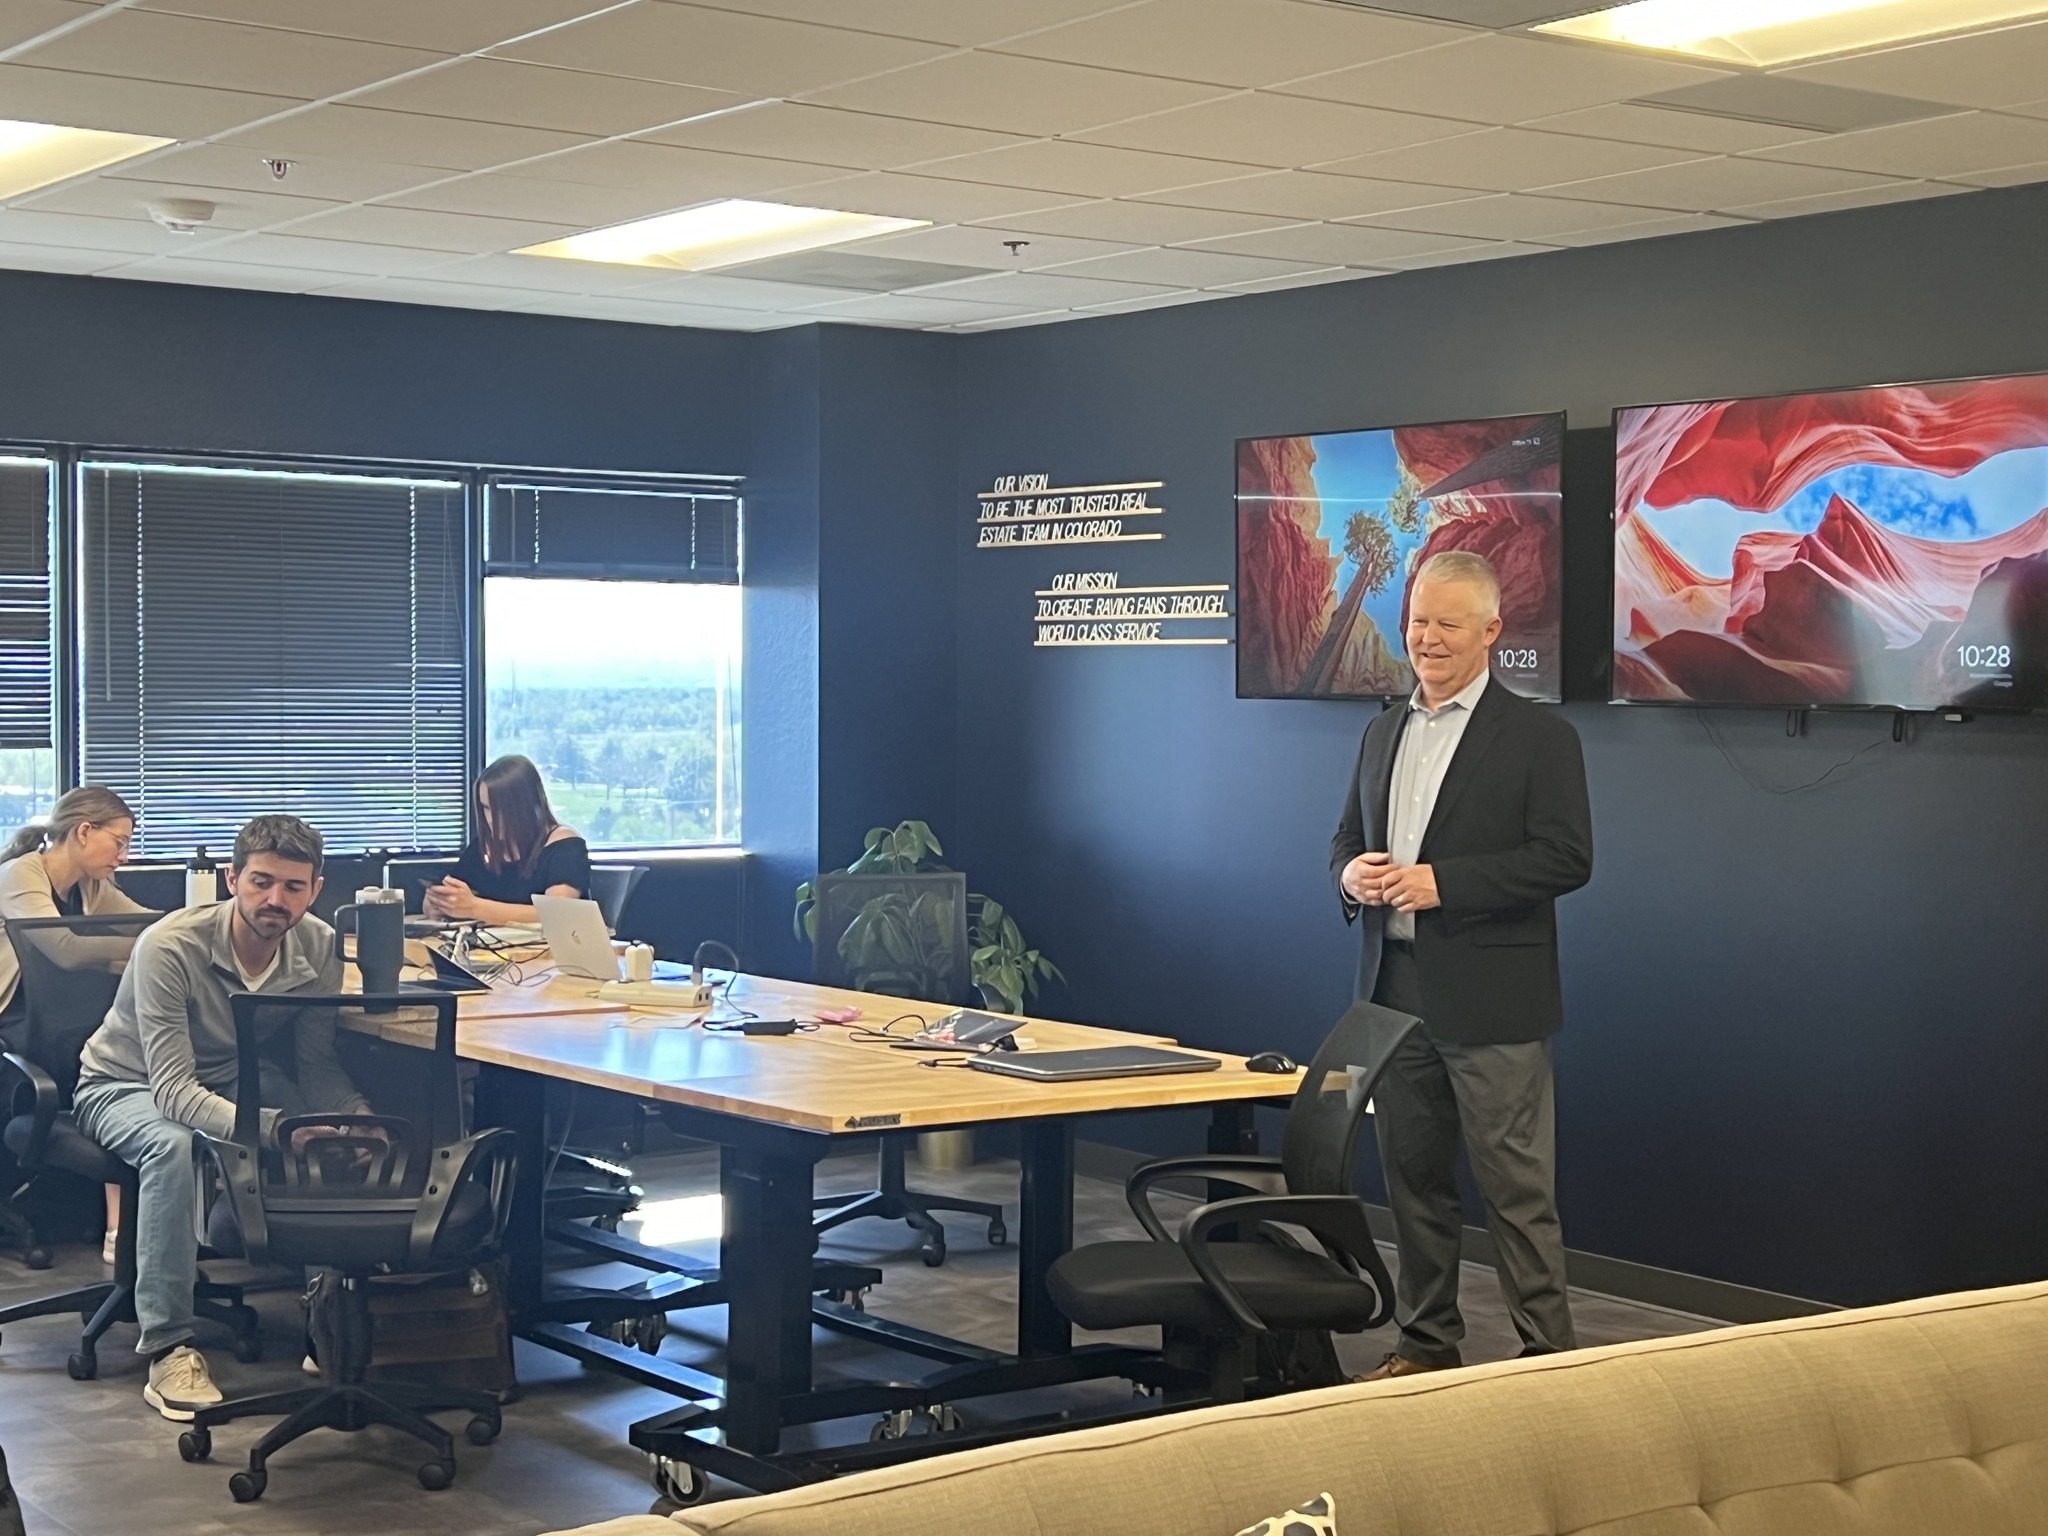 Dave Kochenberger, our mortgage loan officer, spent his morning last week talking with realtors at Ed Prather Real Estate and giving a presentation about today's mortgage market and how to help buyers navigate it successfully. We love Dave's enthusiasm for working with realtors and clients all around Denver!